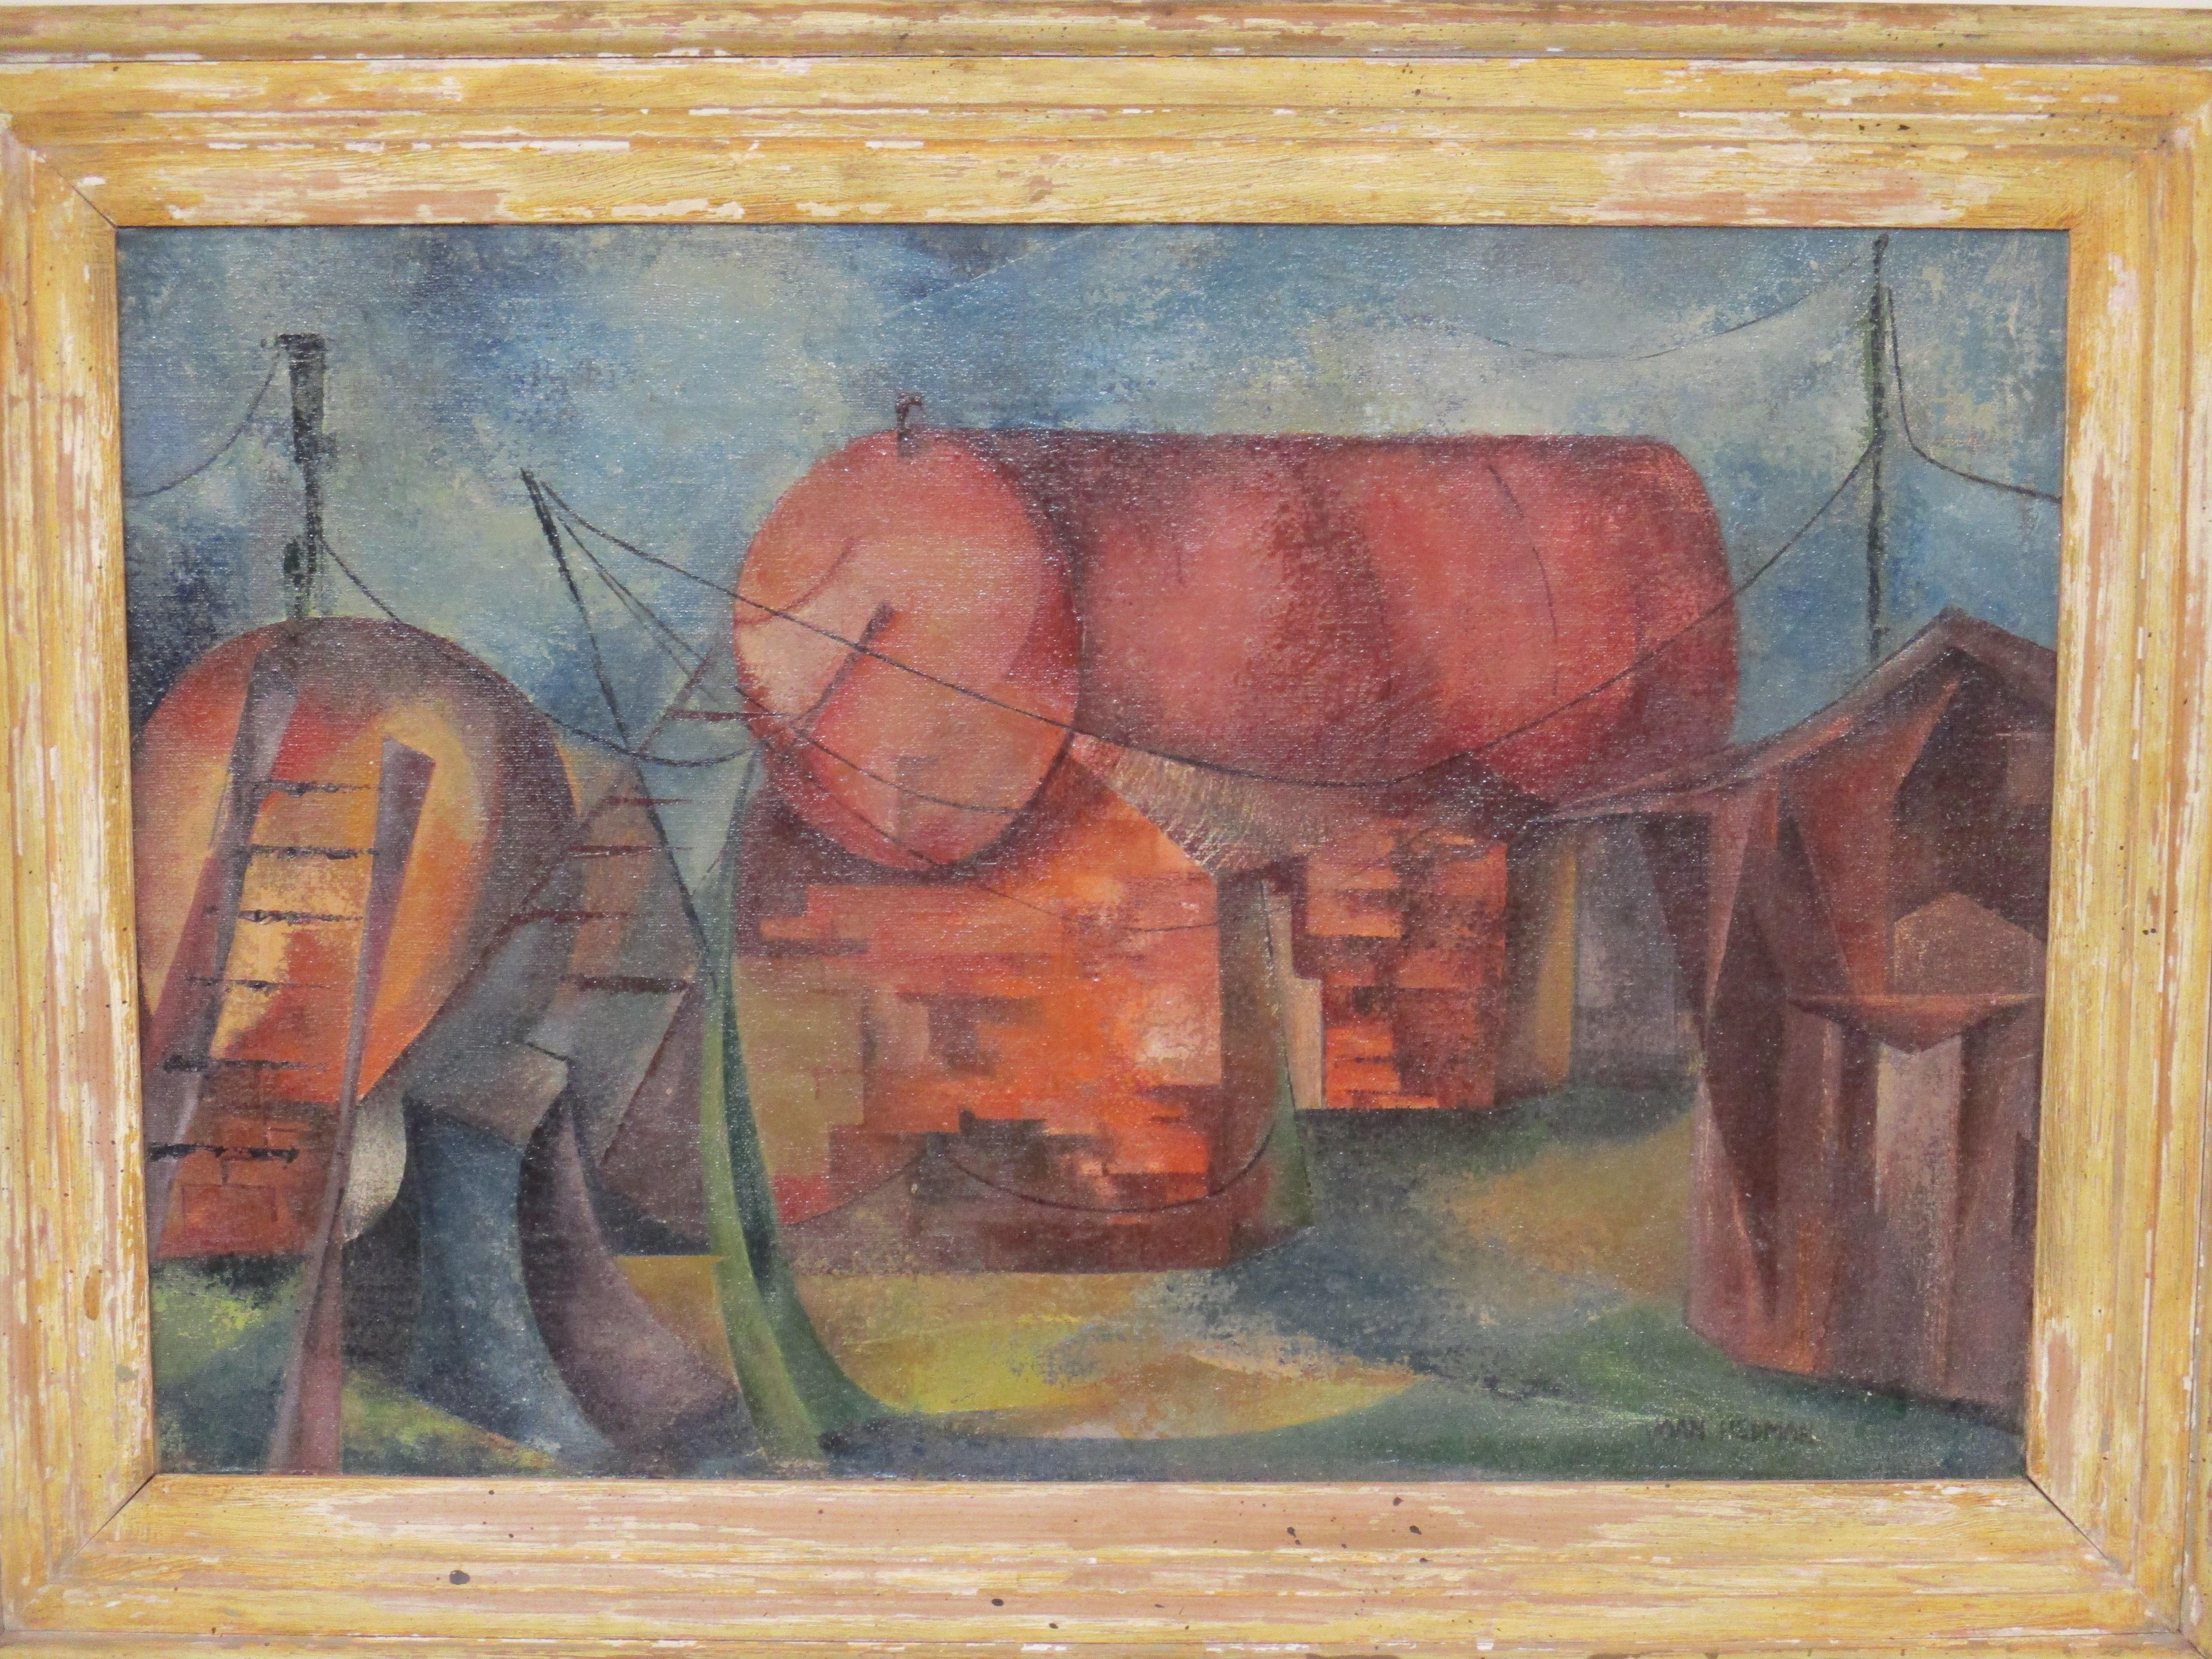 A cubist industrial WPA styled oil painting depicting a storage tank compound in the 1930's-40's. Good layering of colors and textures having it original patina worn wood frame signed by the artist in paint to the corner by Joan Hedman also pencil